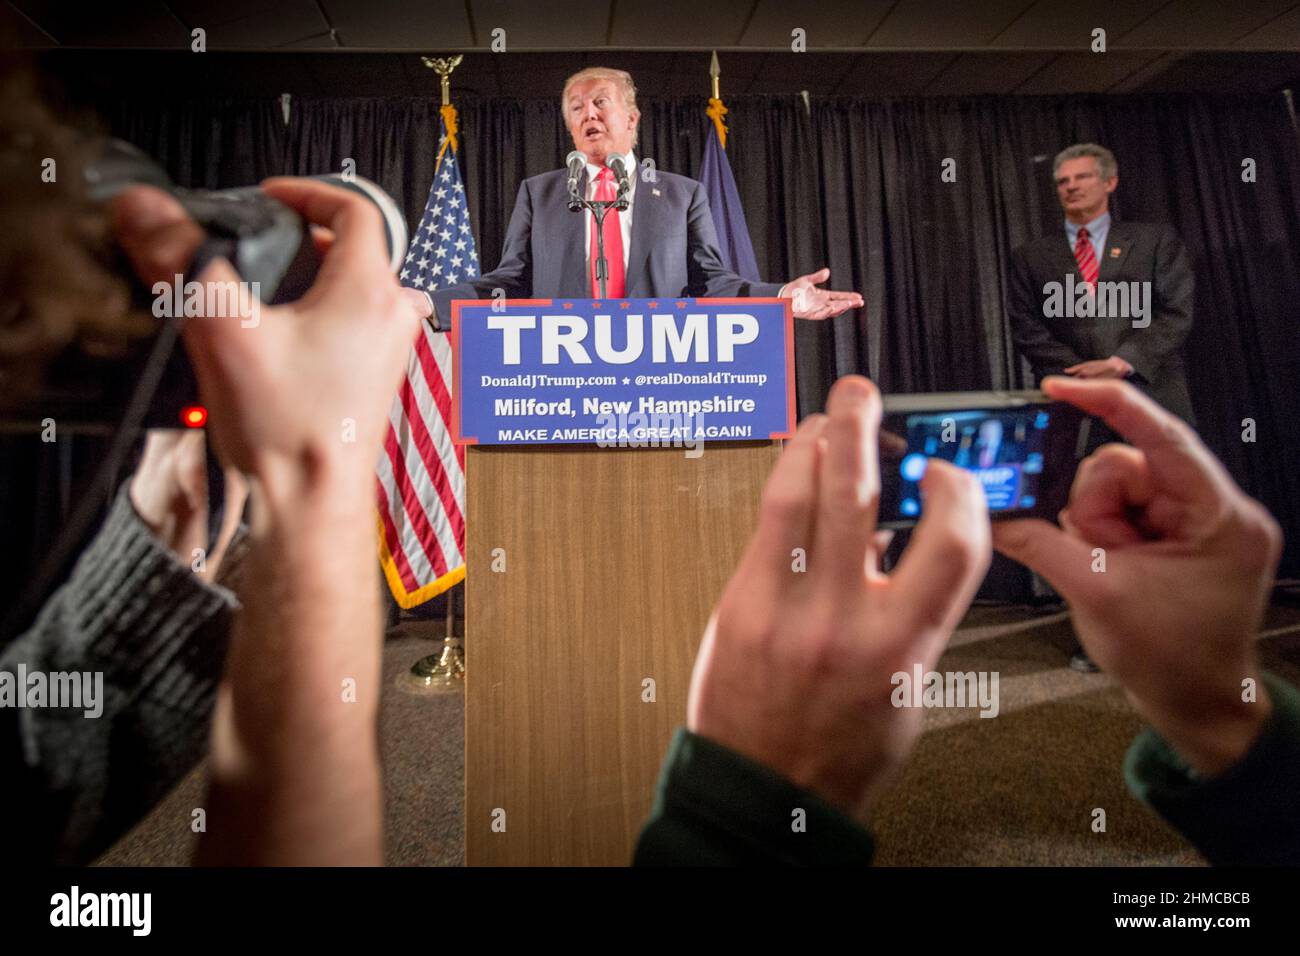 The republican Presidential candidate Donald Trump at a press conference in Milford, NH, where he talked about the defeat in Iowa and expectations for the primary election in New Hampshire. Stock Photo